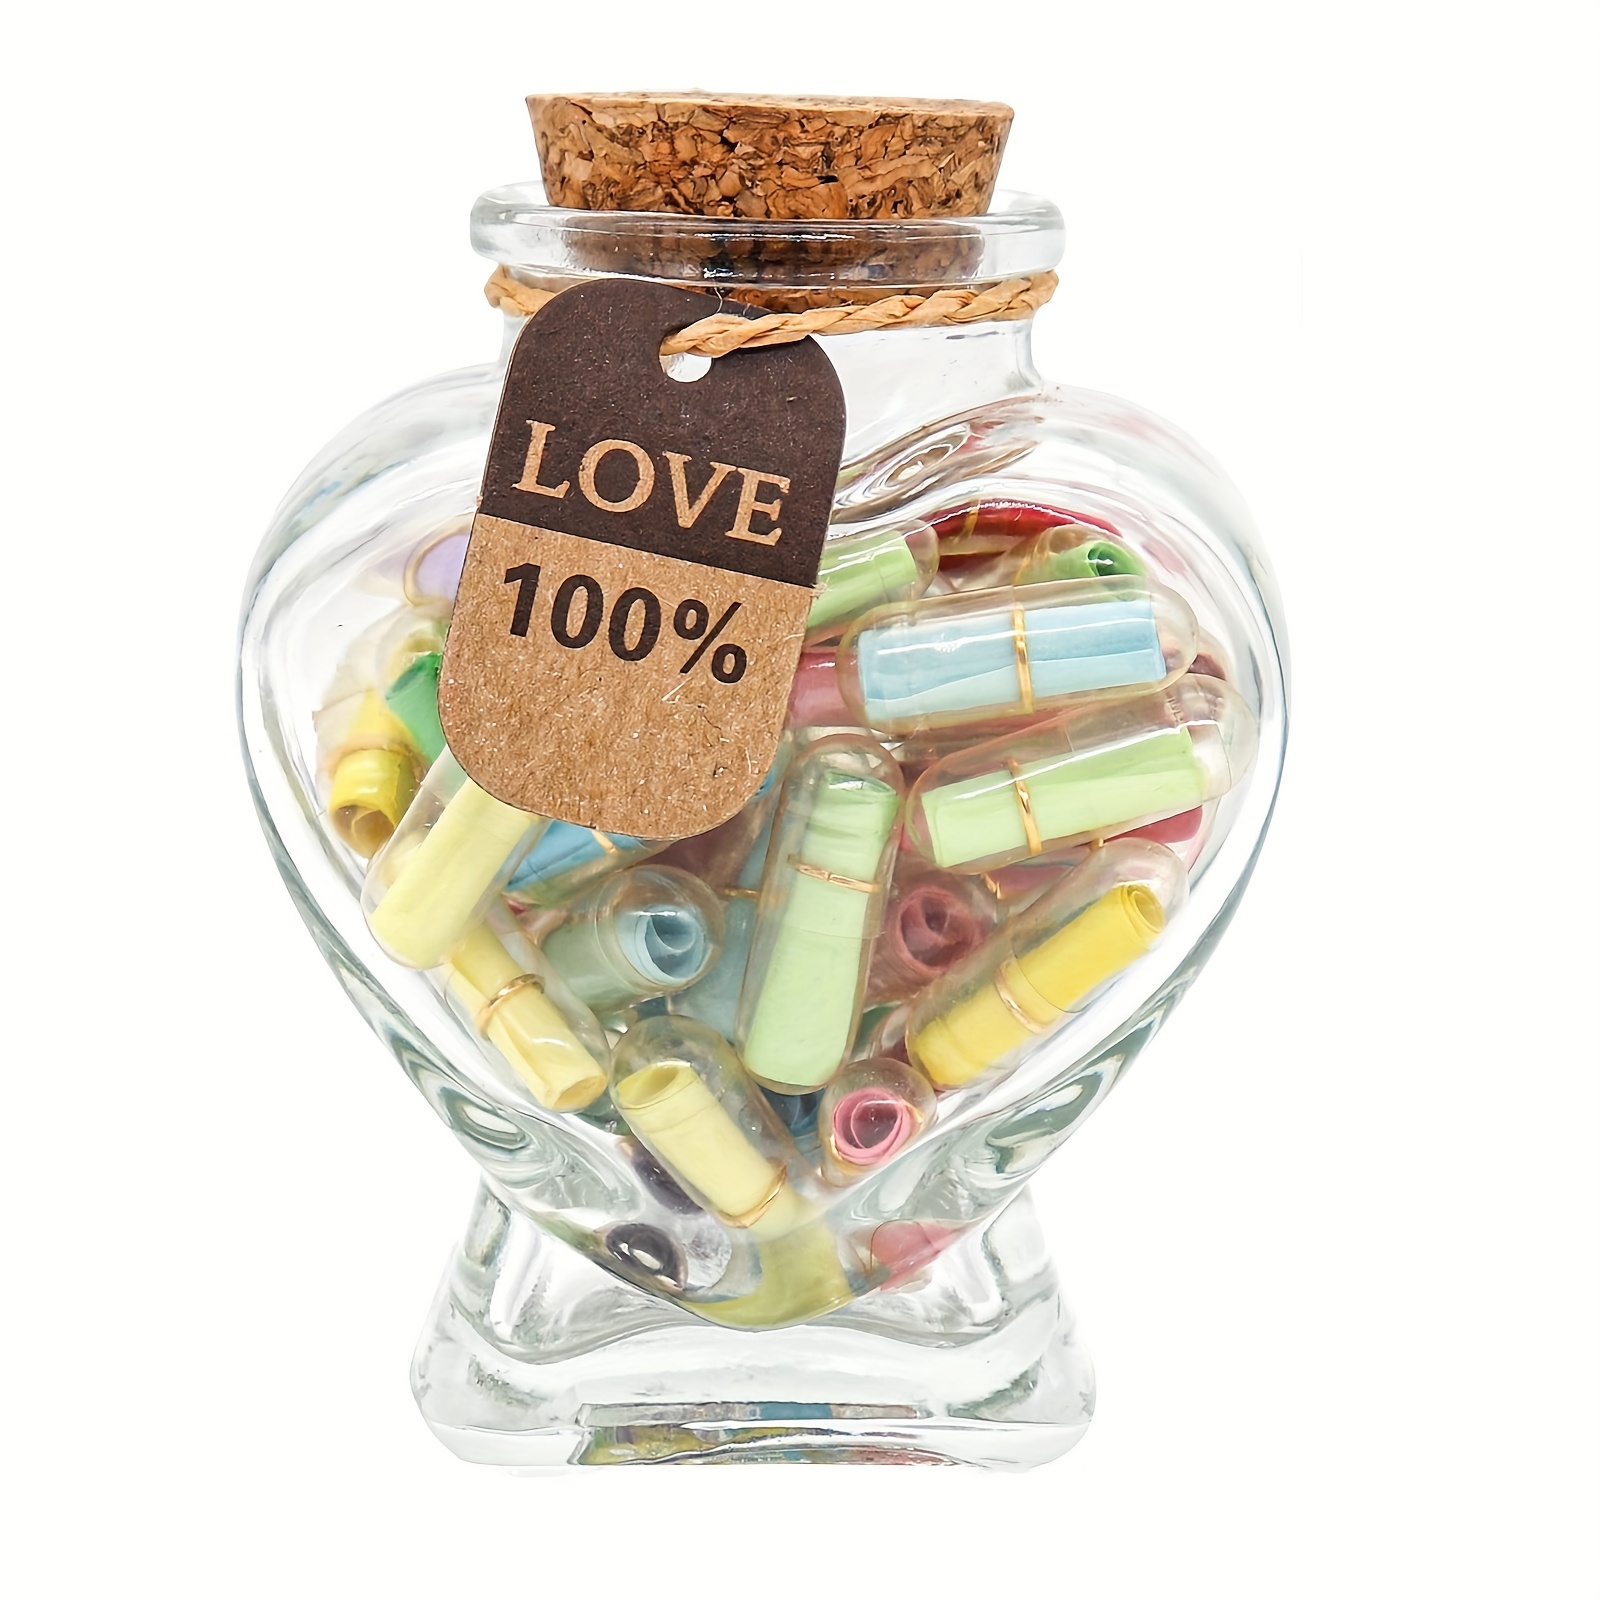 

50pcs, Capsule Message Paper Letter In A Bottle, Love Cute Things Gifts For Boyfriend/girlfriend - Love Letter For Anniversary, Birthday, Valentines Day, Mother's Day Gift